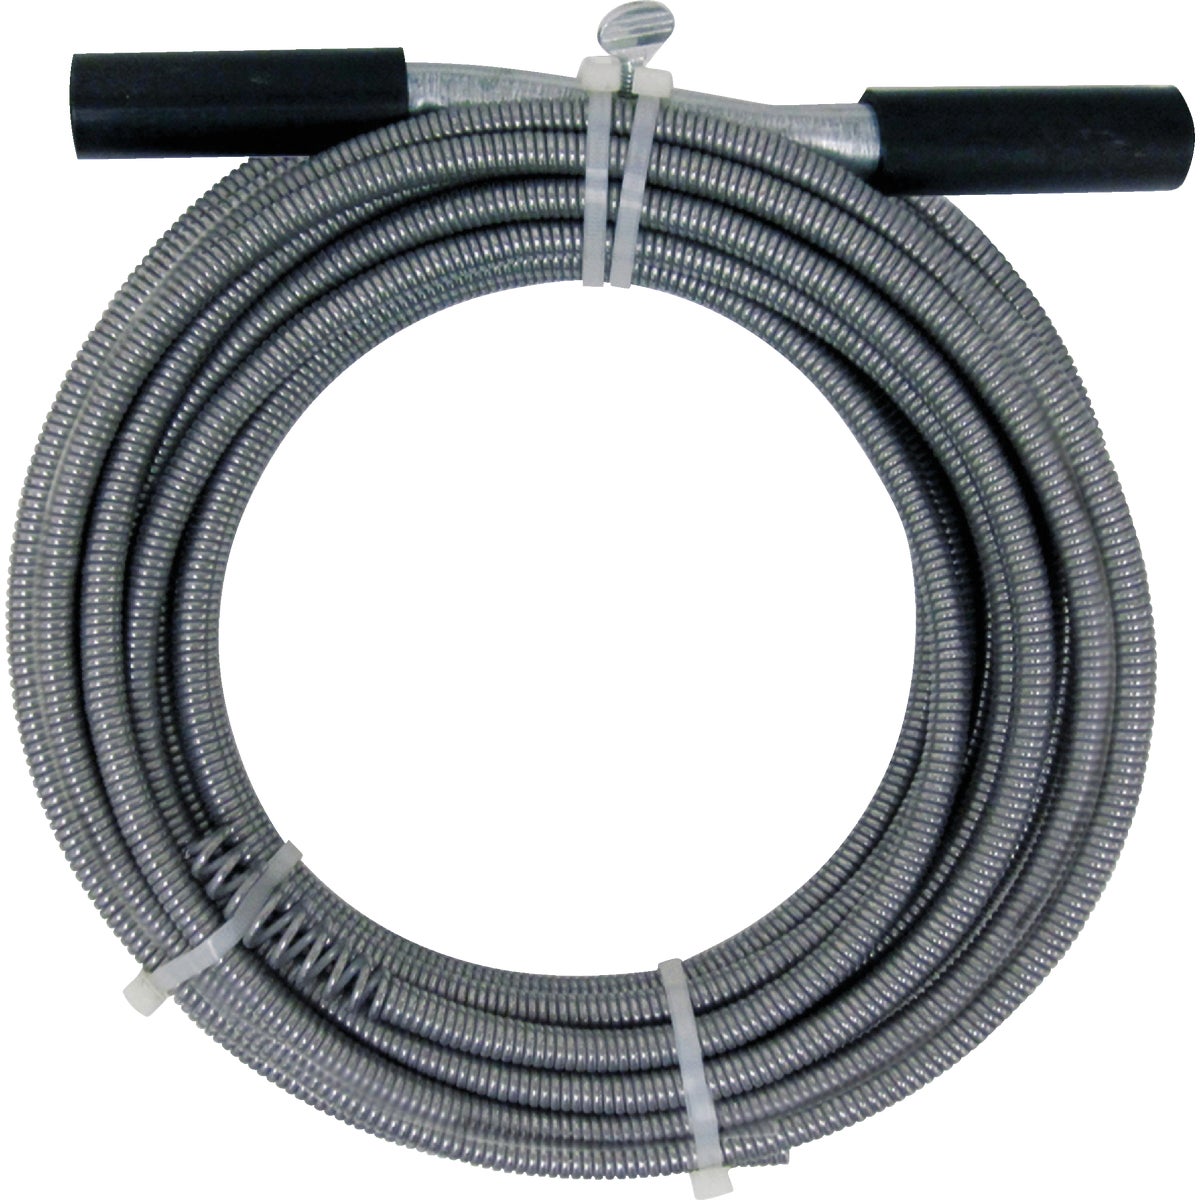 Cobra 3/8 In. x 50 Ft. Steel Wire Cleanout Drain Auger